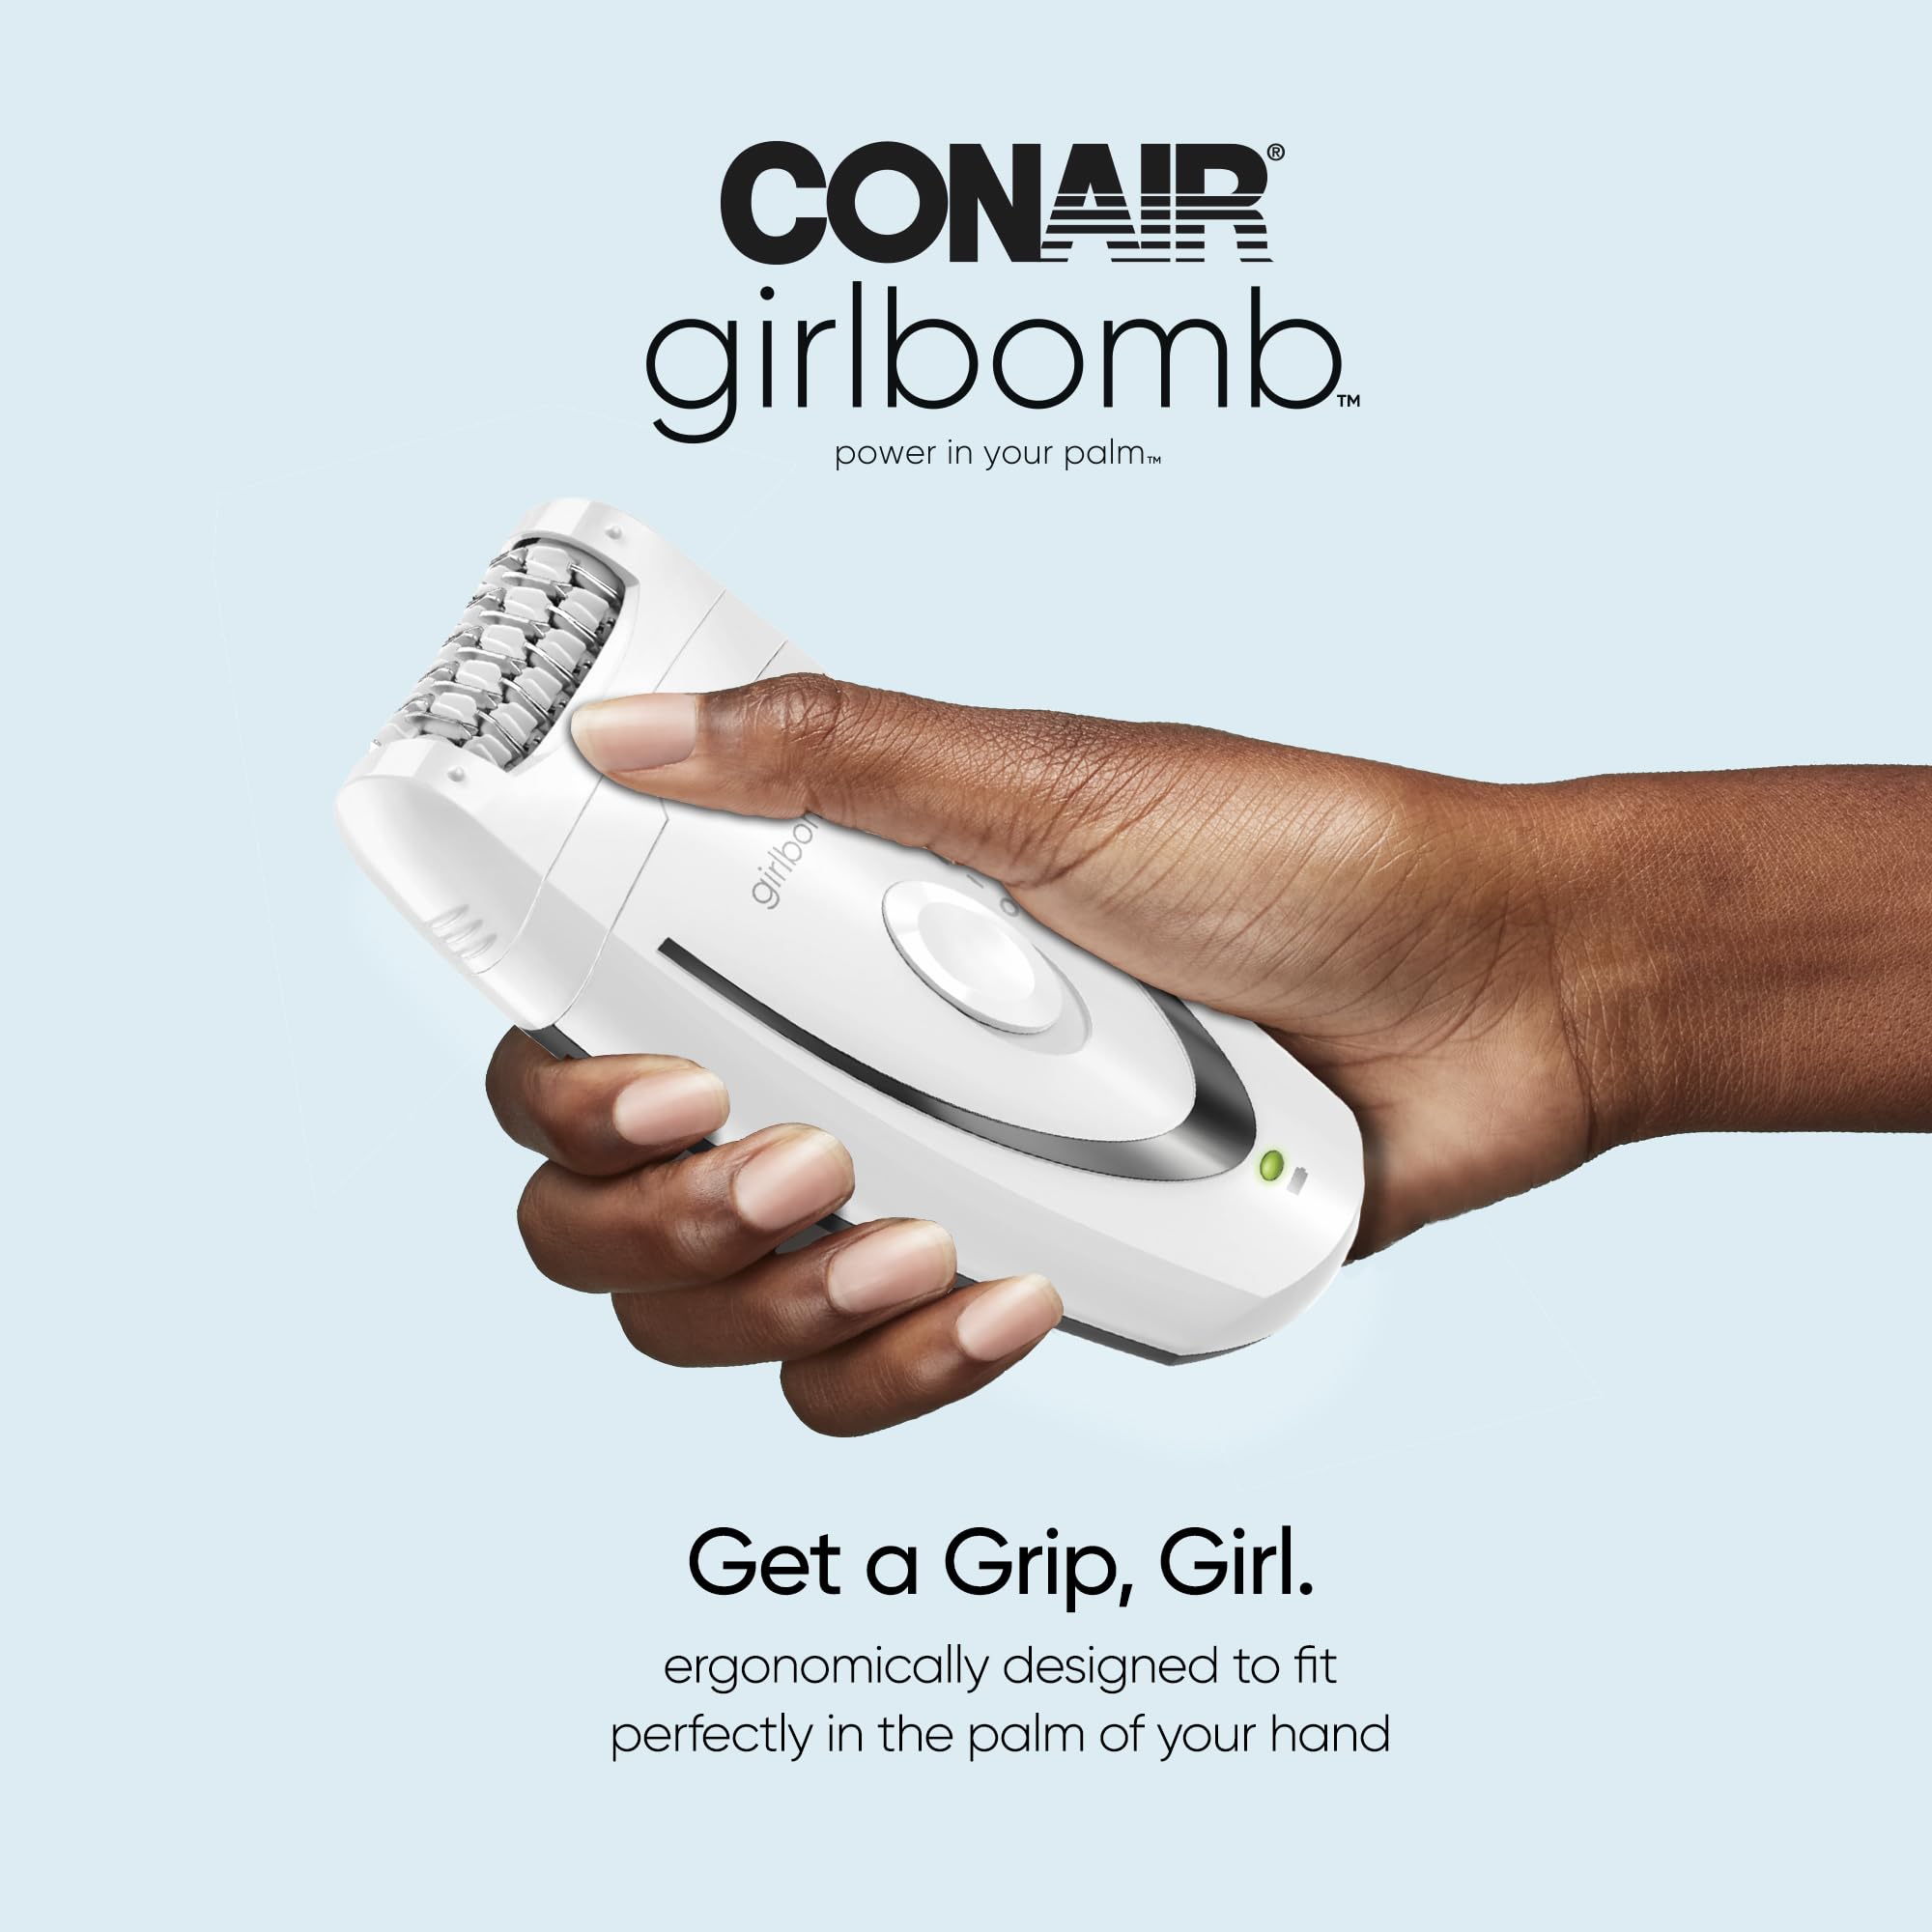 Conair GIRLBOMB Epilator with Ice Roller for Smooth and Soft Skin, Hair Removal Device, Epilator for Women, Women’s Shaver & Trimmer, 3-Piece Set with Ice Roller Attachment, Cordless/Rechargeable